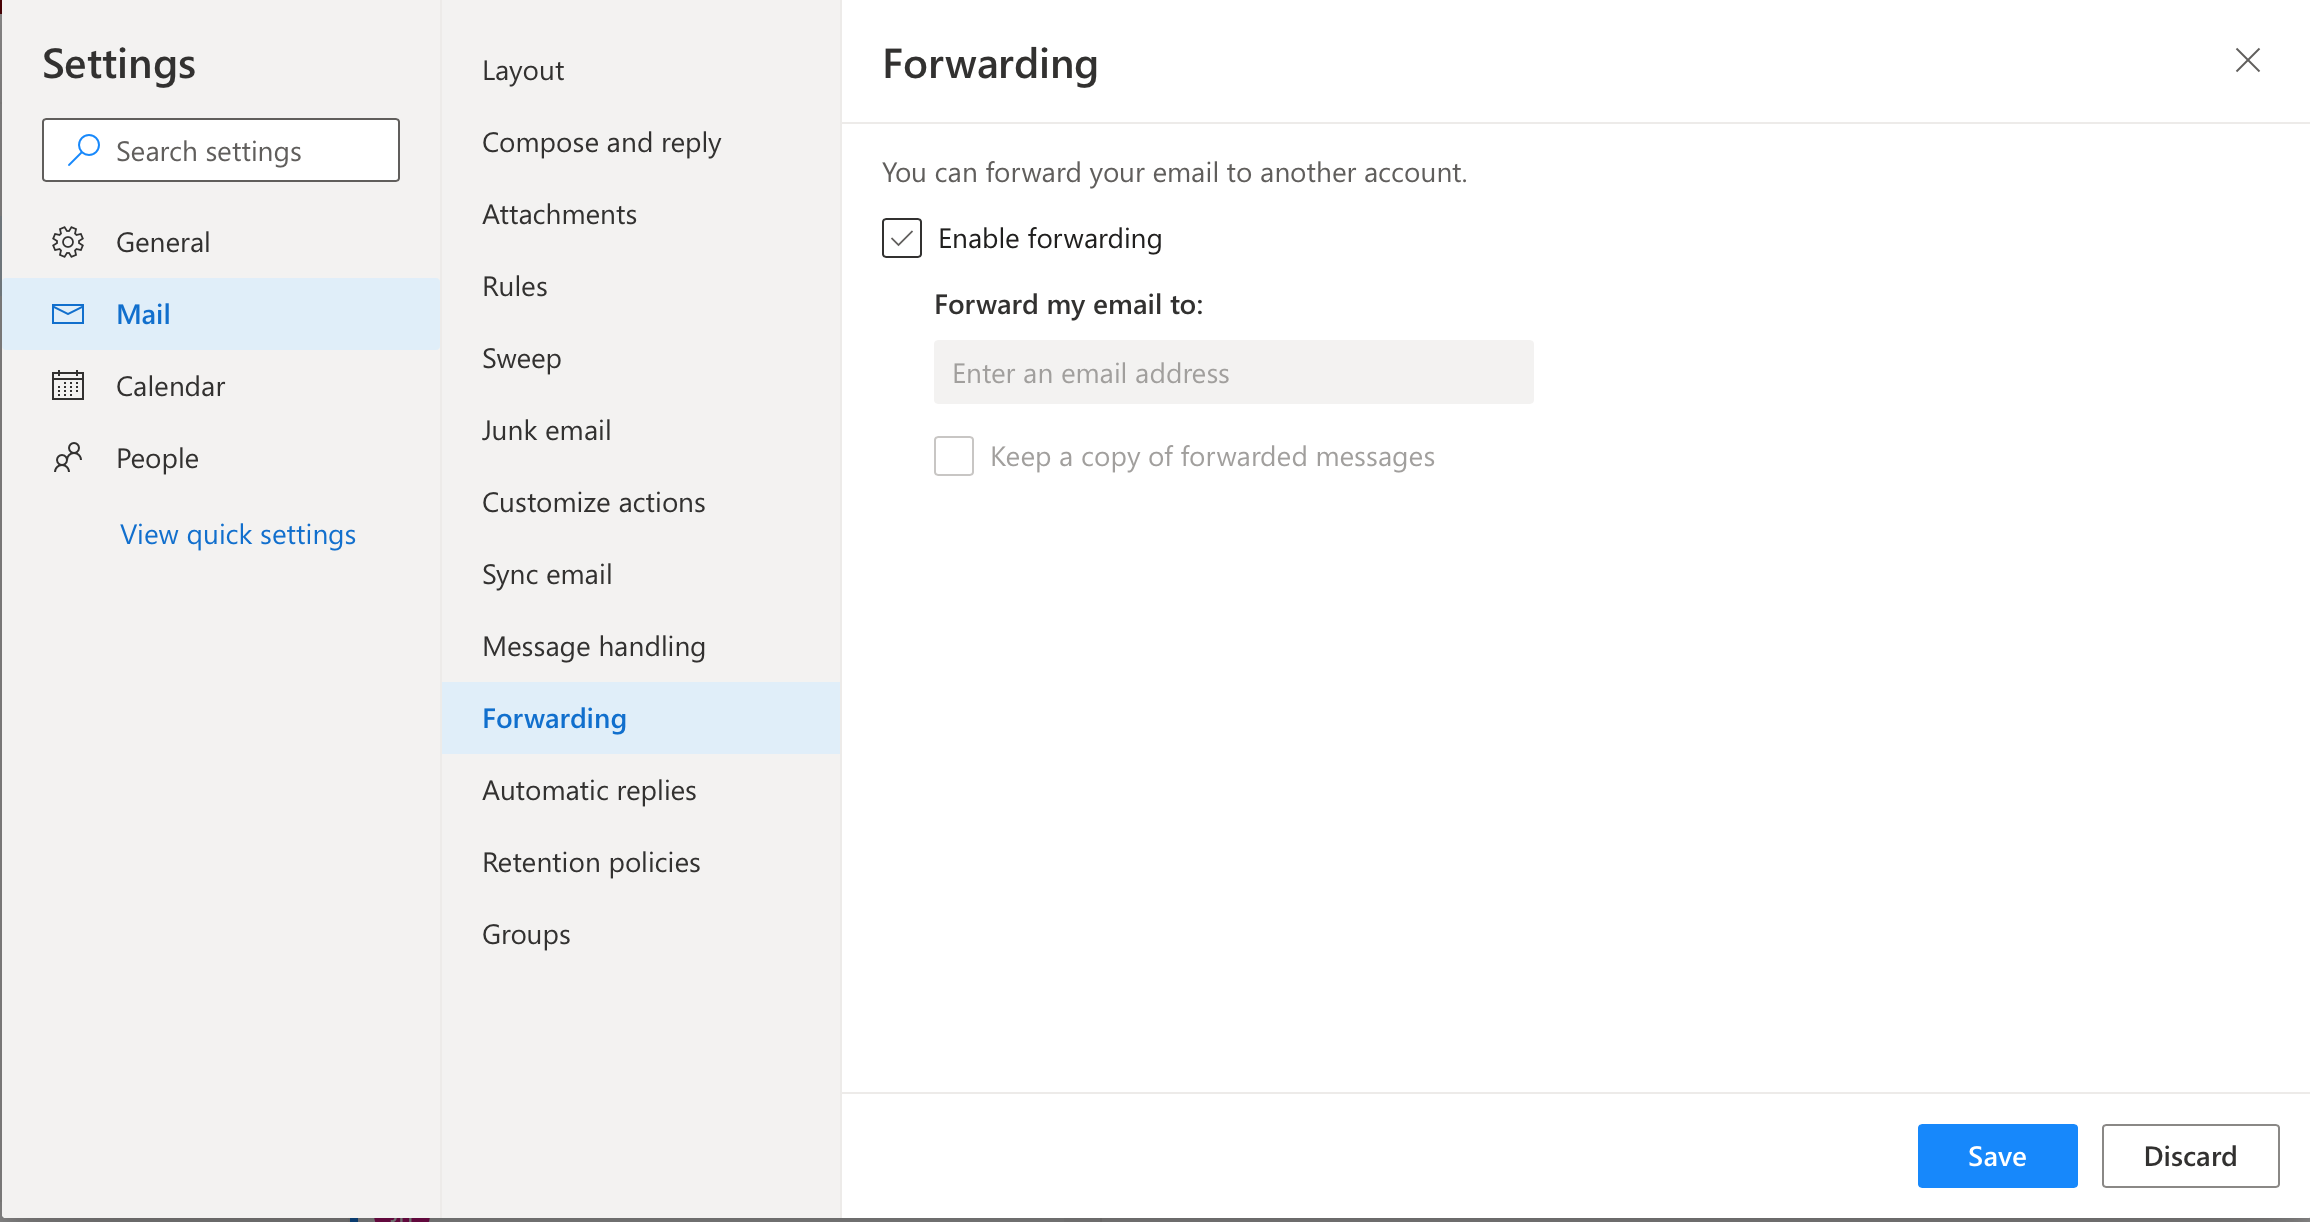 Mail forwarding checkbox selected